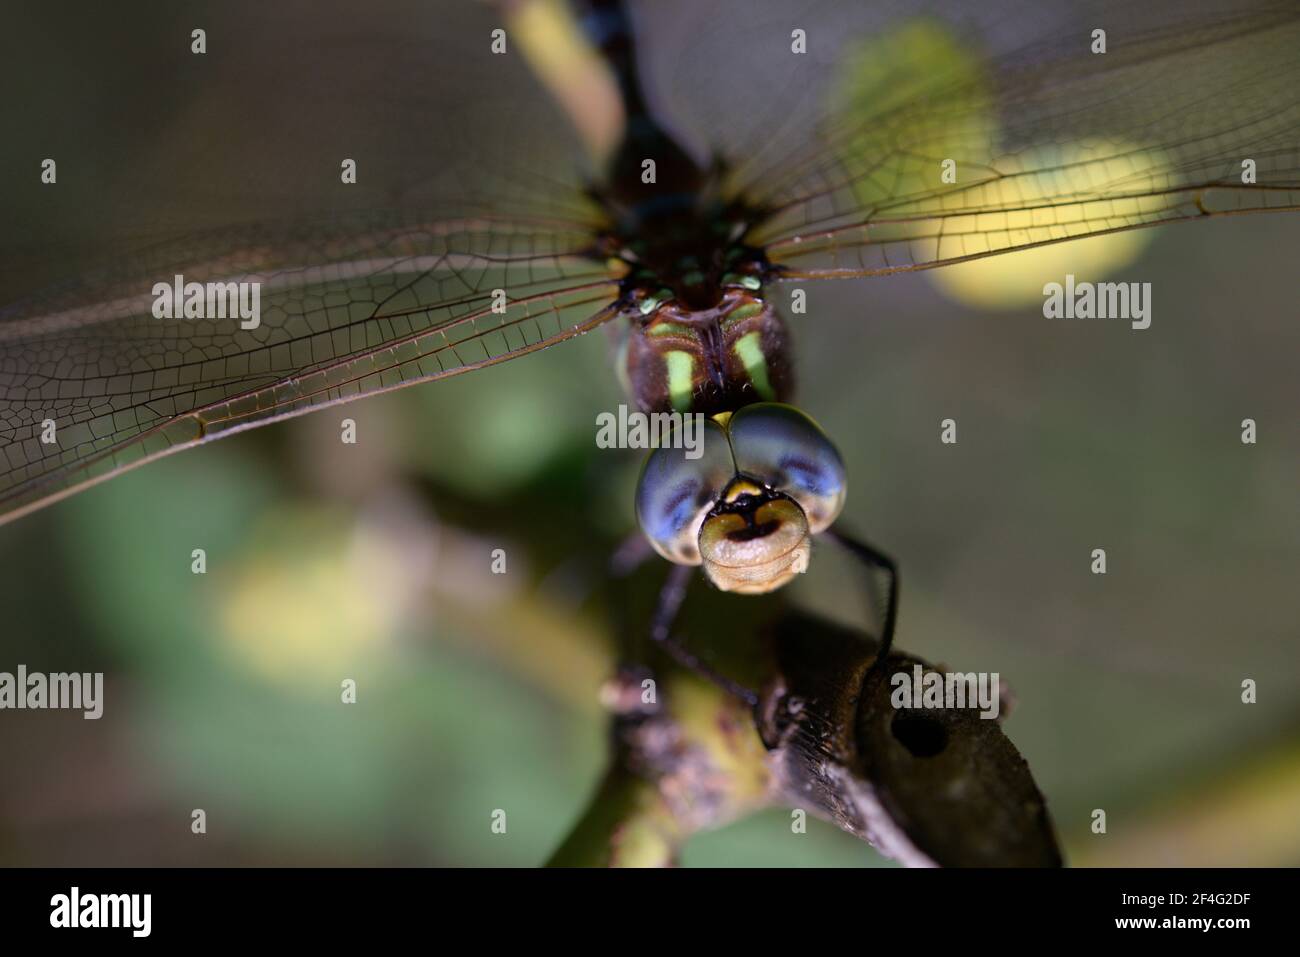 closeup of a darner, or large slender-bodied dragonfly, showing large, multifaceted eyes Stock Photo